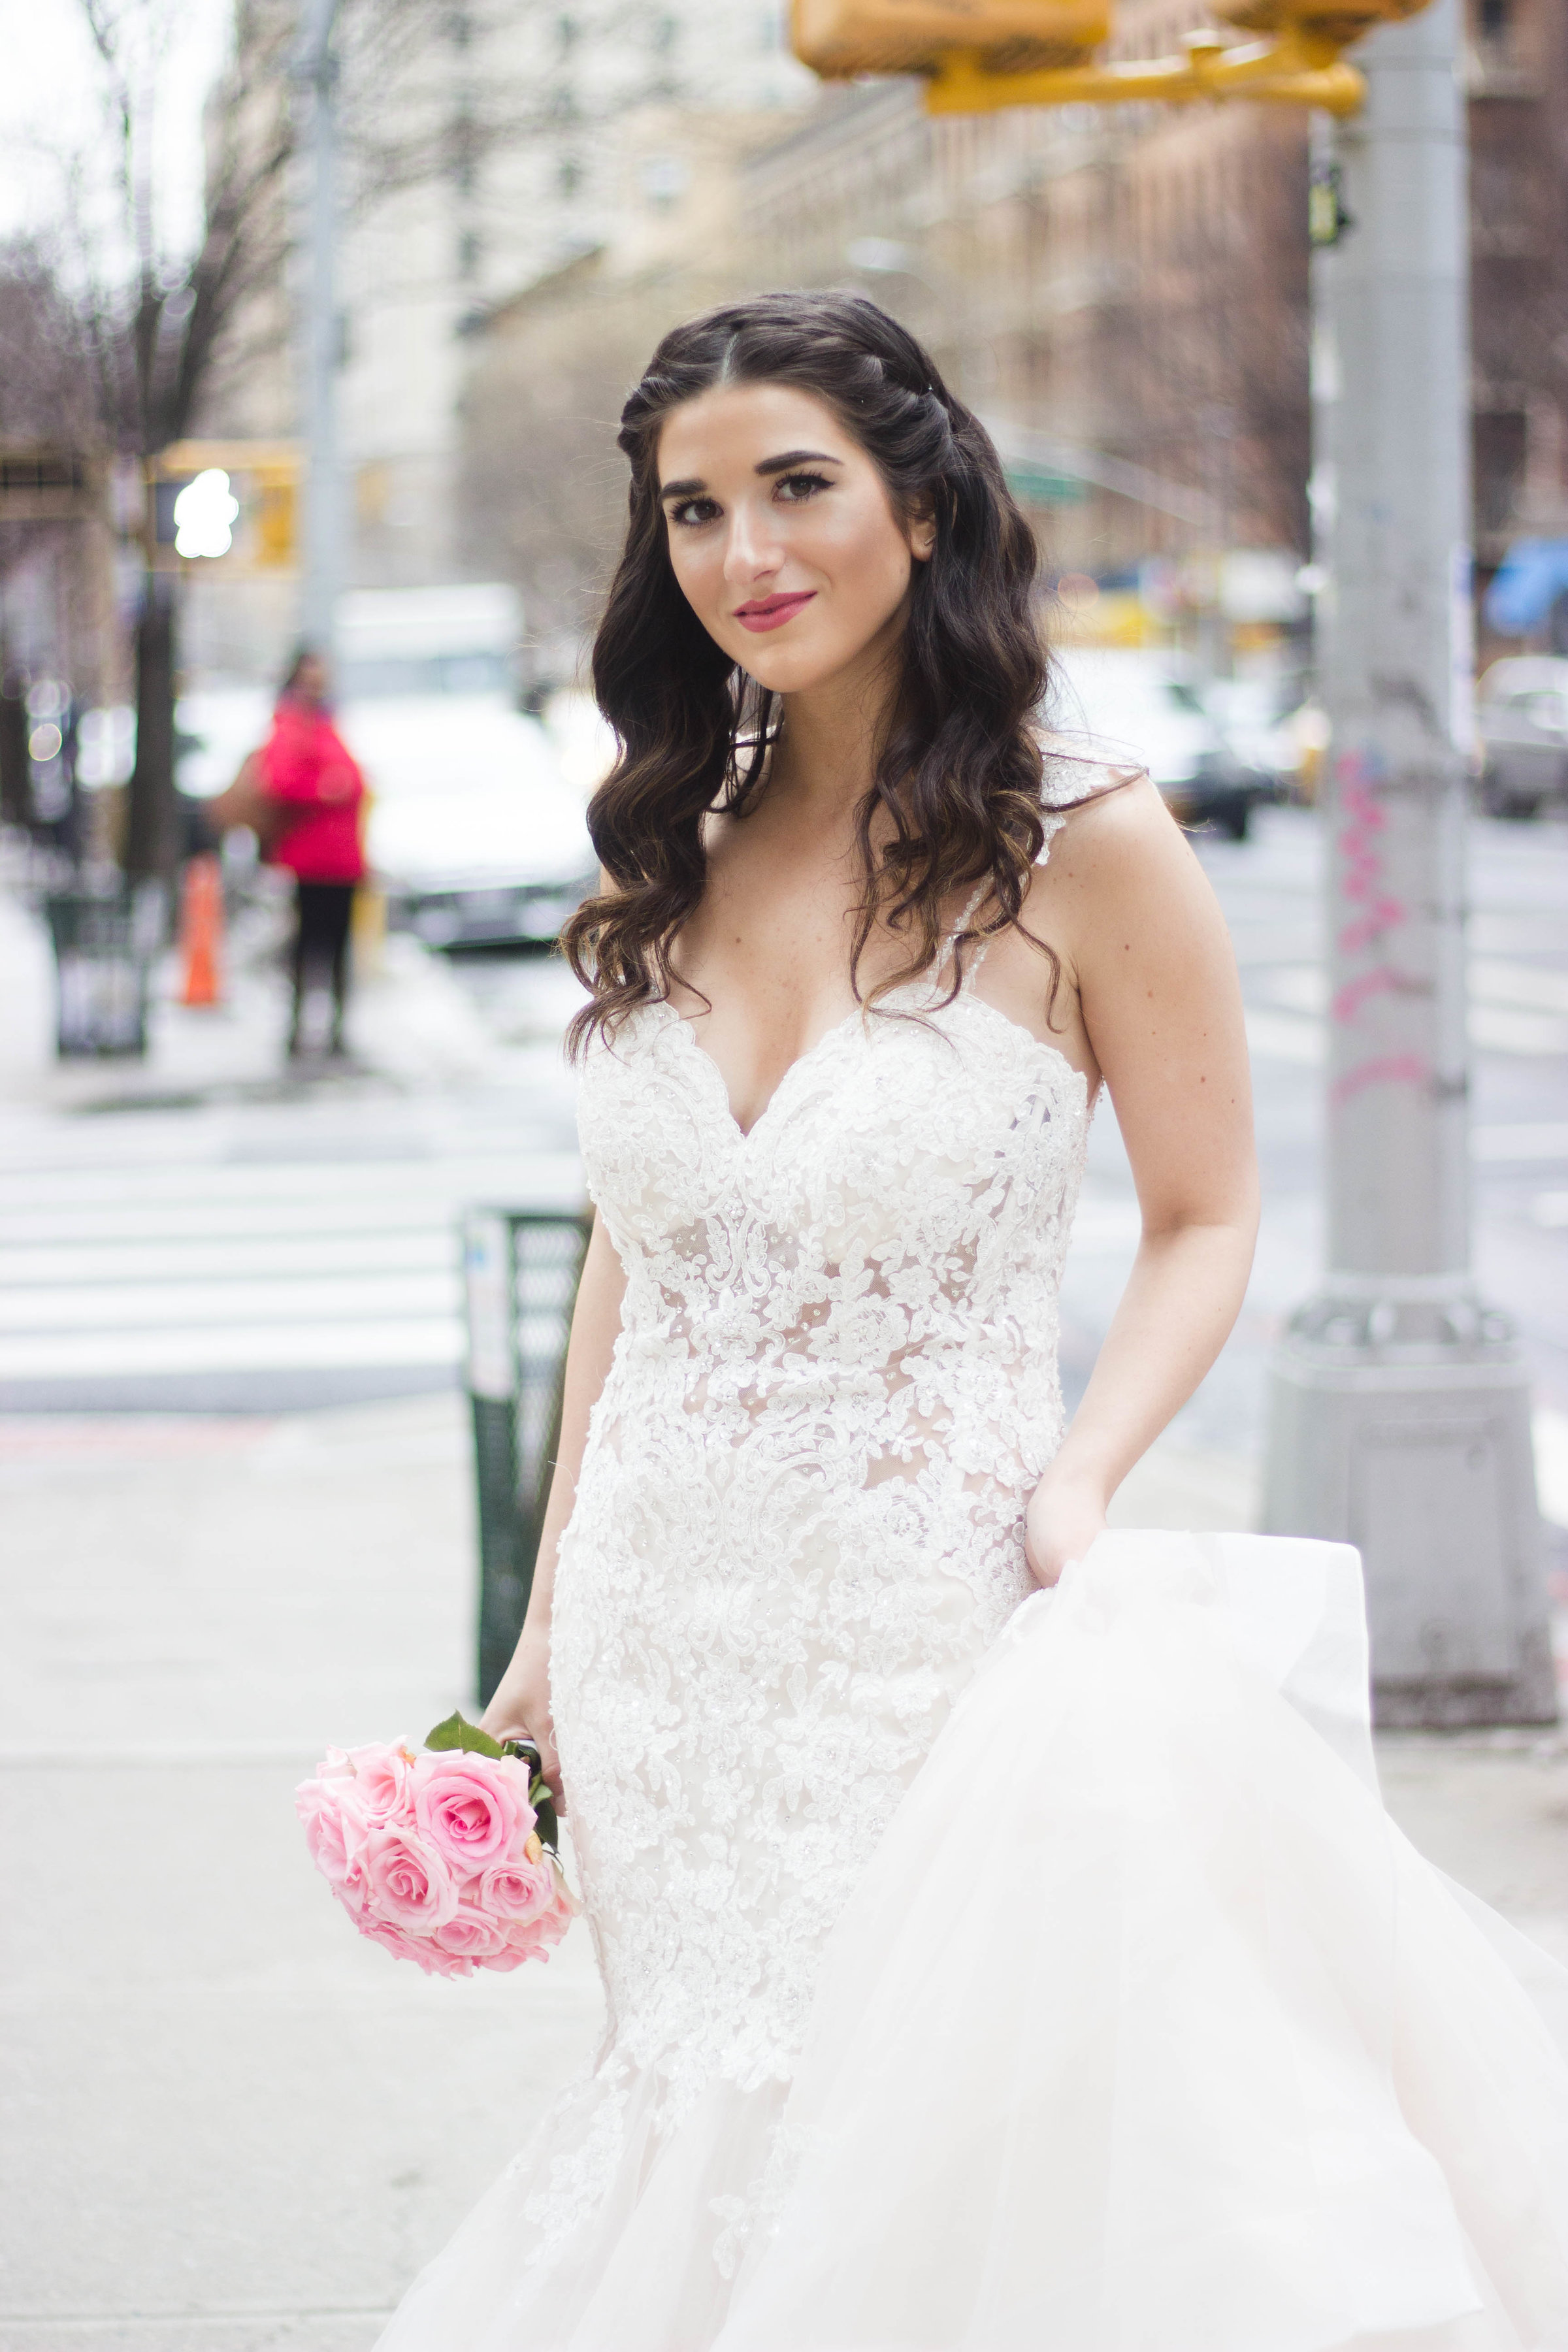 Playing Dress Up With Morilee Bridal Esther Santer Fashion Blog NYC Street Style Blogger Outfit OOTD Trendy Wedding Dress Gown White Dreamy Modern Timeless Beautiful Train Pink Flowers Bouquet Hair Hairstyle Beauty Makeup Lace Mermaid Trumpet Flare.jpg